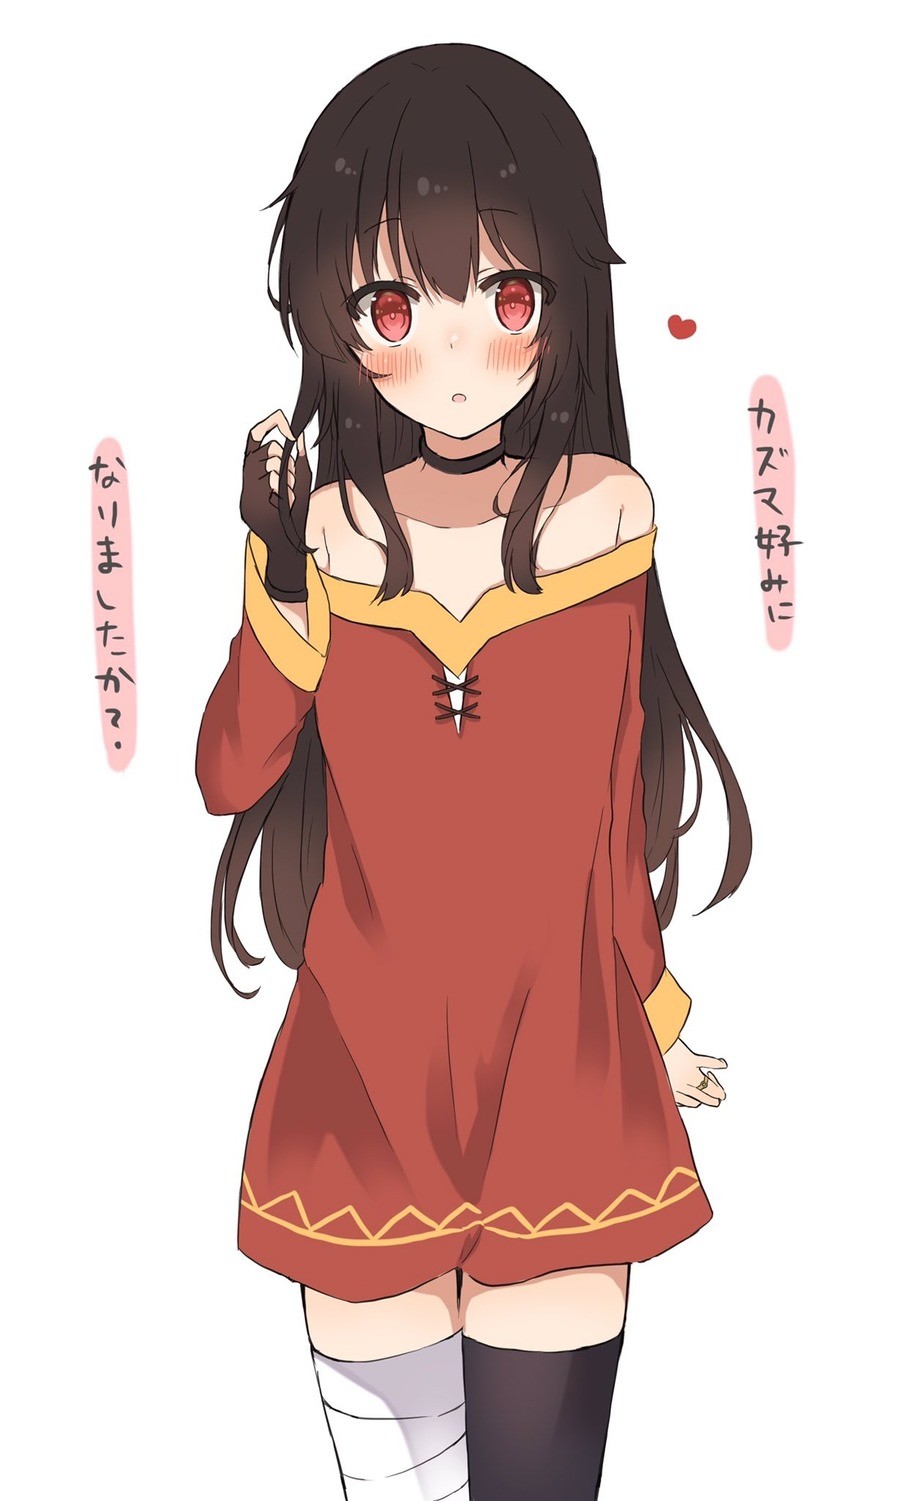 Daily Megu - 927: Long Hair. join list: DailySplosion (827 subs)Mention History Source: .